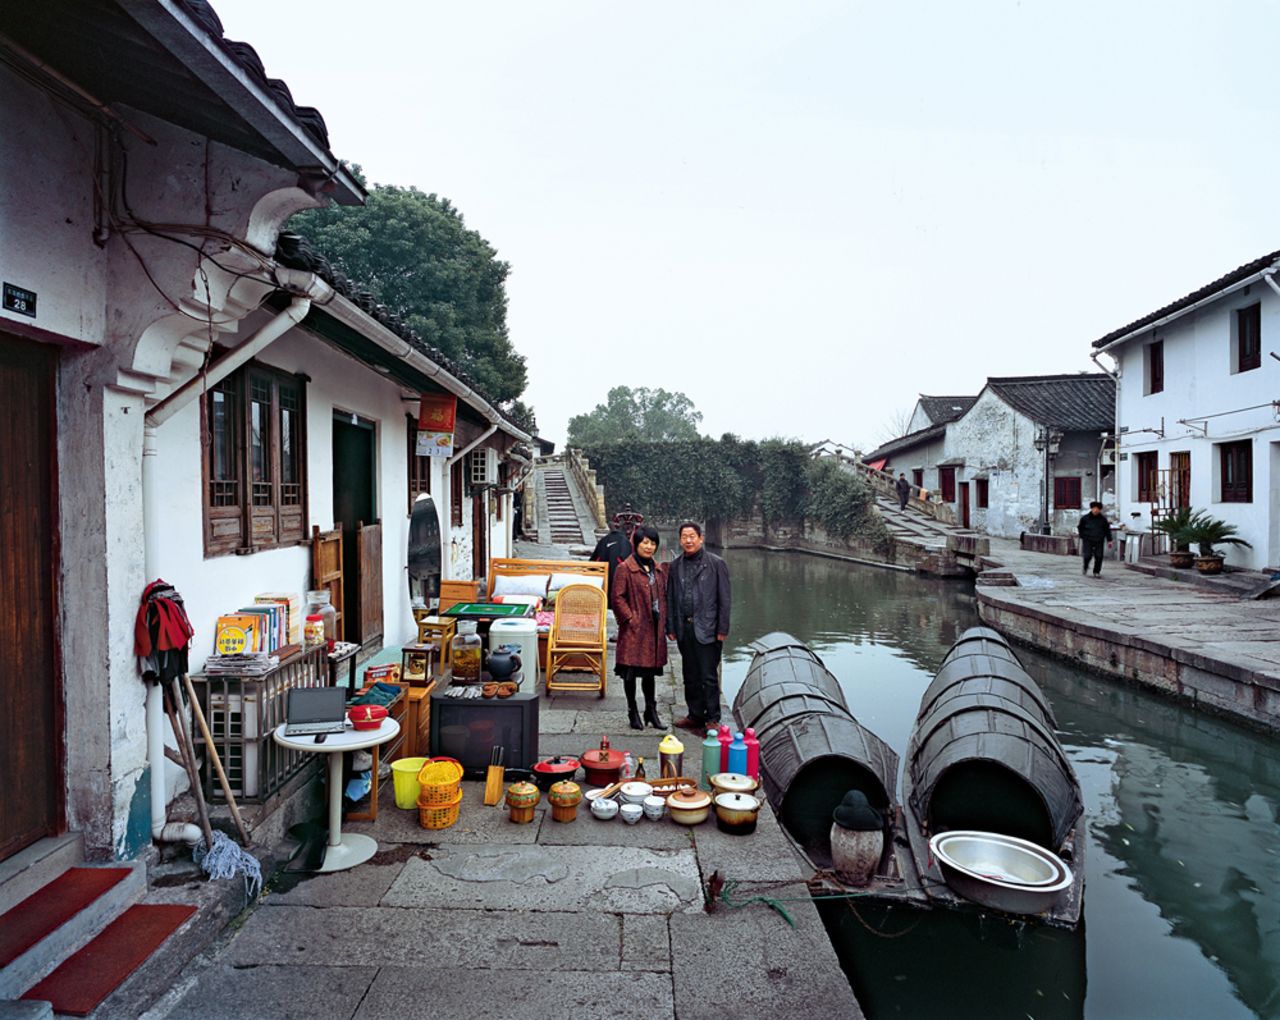 This family lives in a floating home next to a small river running through the city of Shaoxing in Zhejiang province. Xu Mugen is a manager at a construction development company, and his wife, Fan Guofang is a ticket clerk at the Shaoxing East Lake Scenic Site. They have one son, and make about 400,000 yuan ($64,335) a year. 